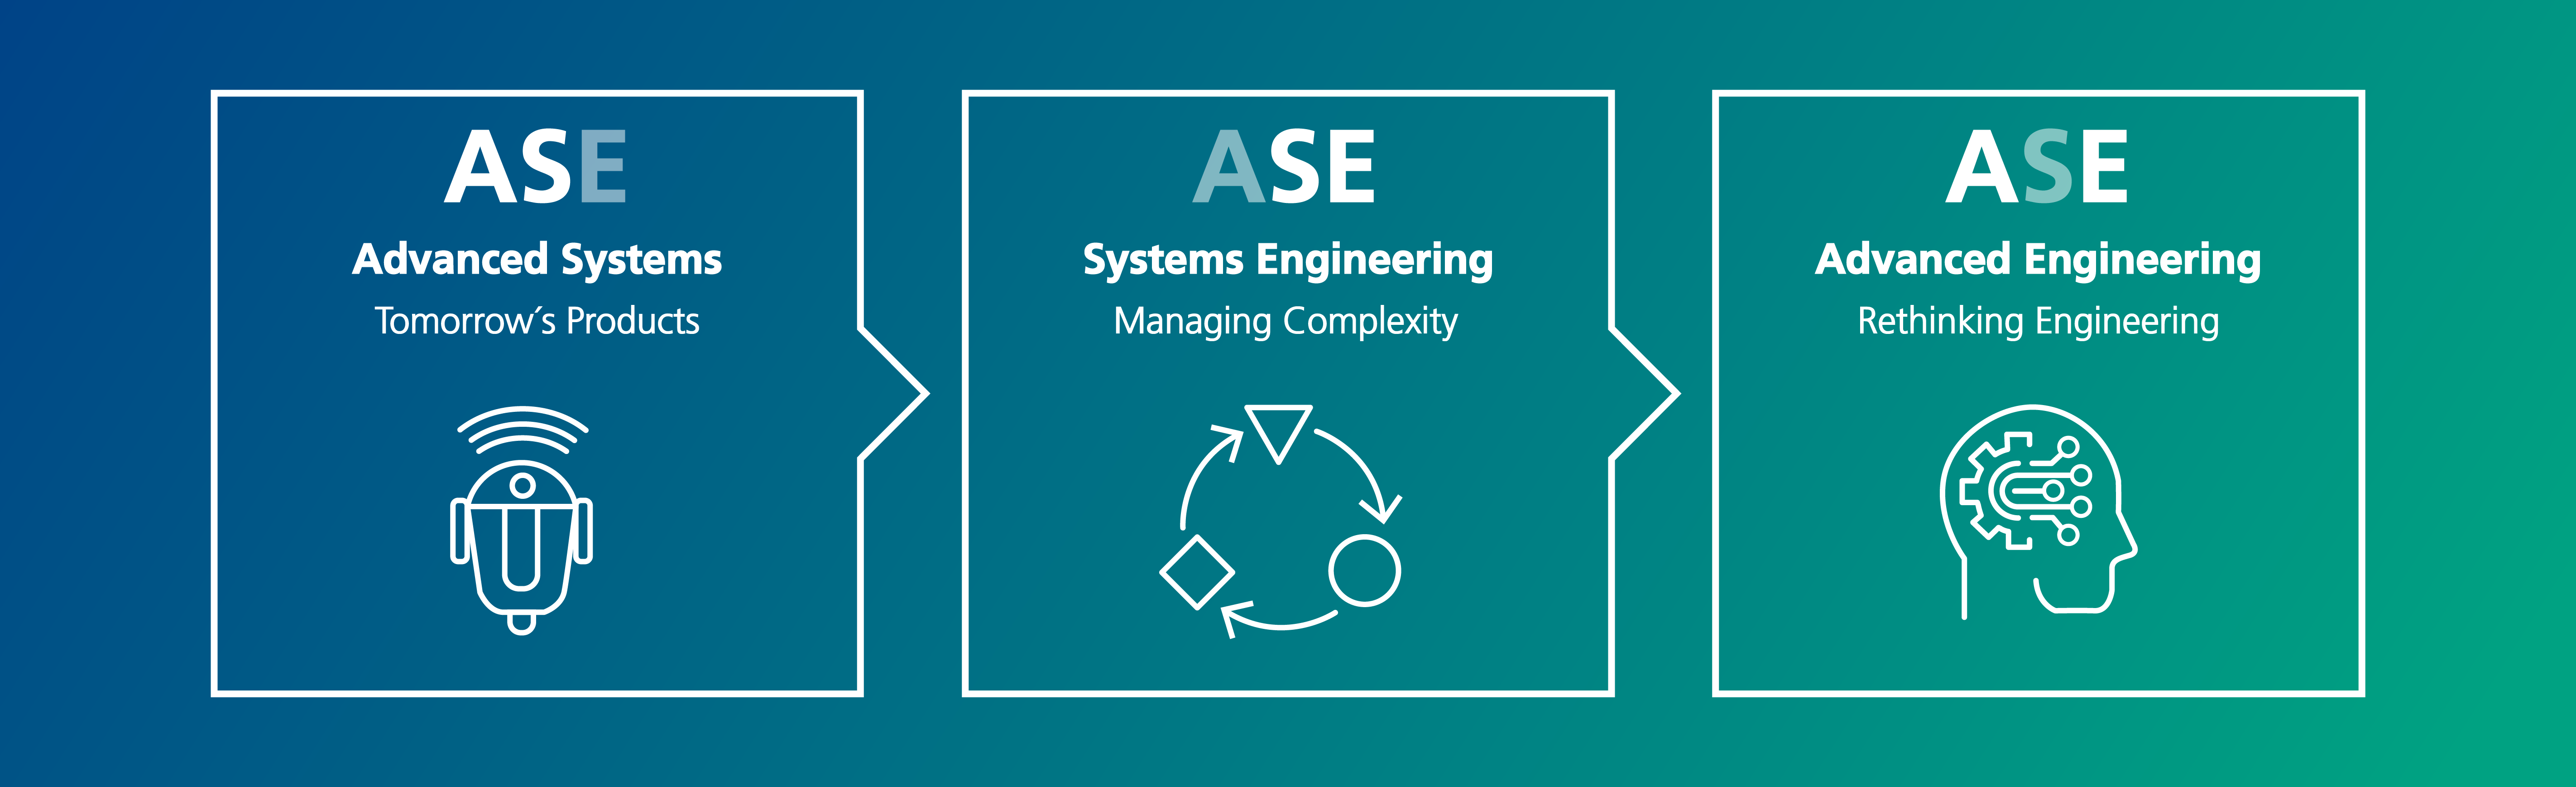 Graphic showing the Advanced Systems Engineering topic in three phases.